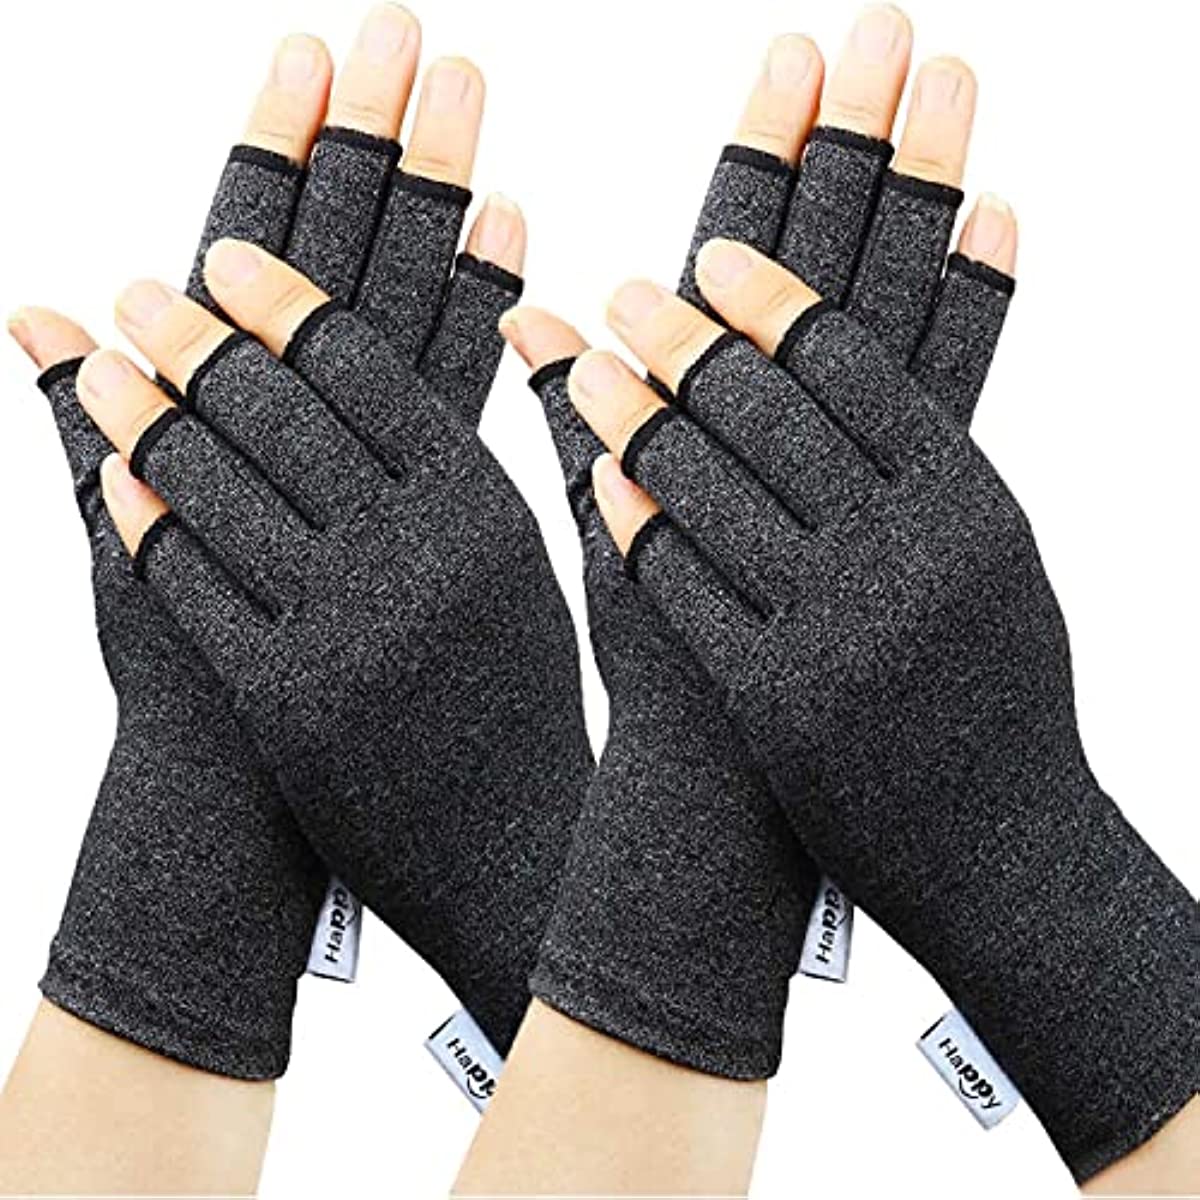 2 Pairs Arthritis Gloves, Compression Gloves for Rheumatoid & Osteoarthritis,Joint Pain Relief, Carpal Tunnel Wrist Support,Computer Typing,Fingerless Gloves for Women (Black, Small)